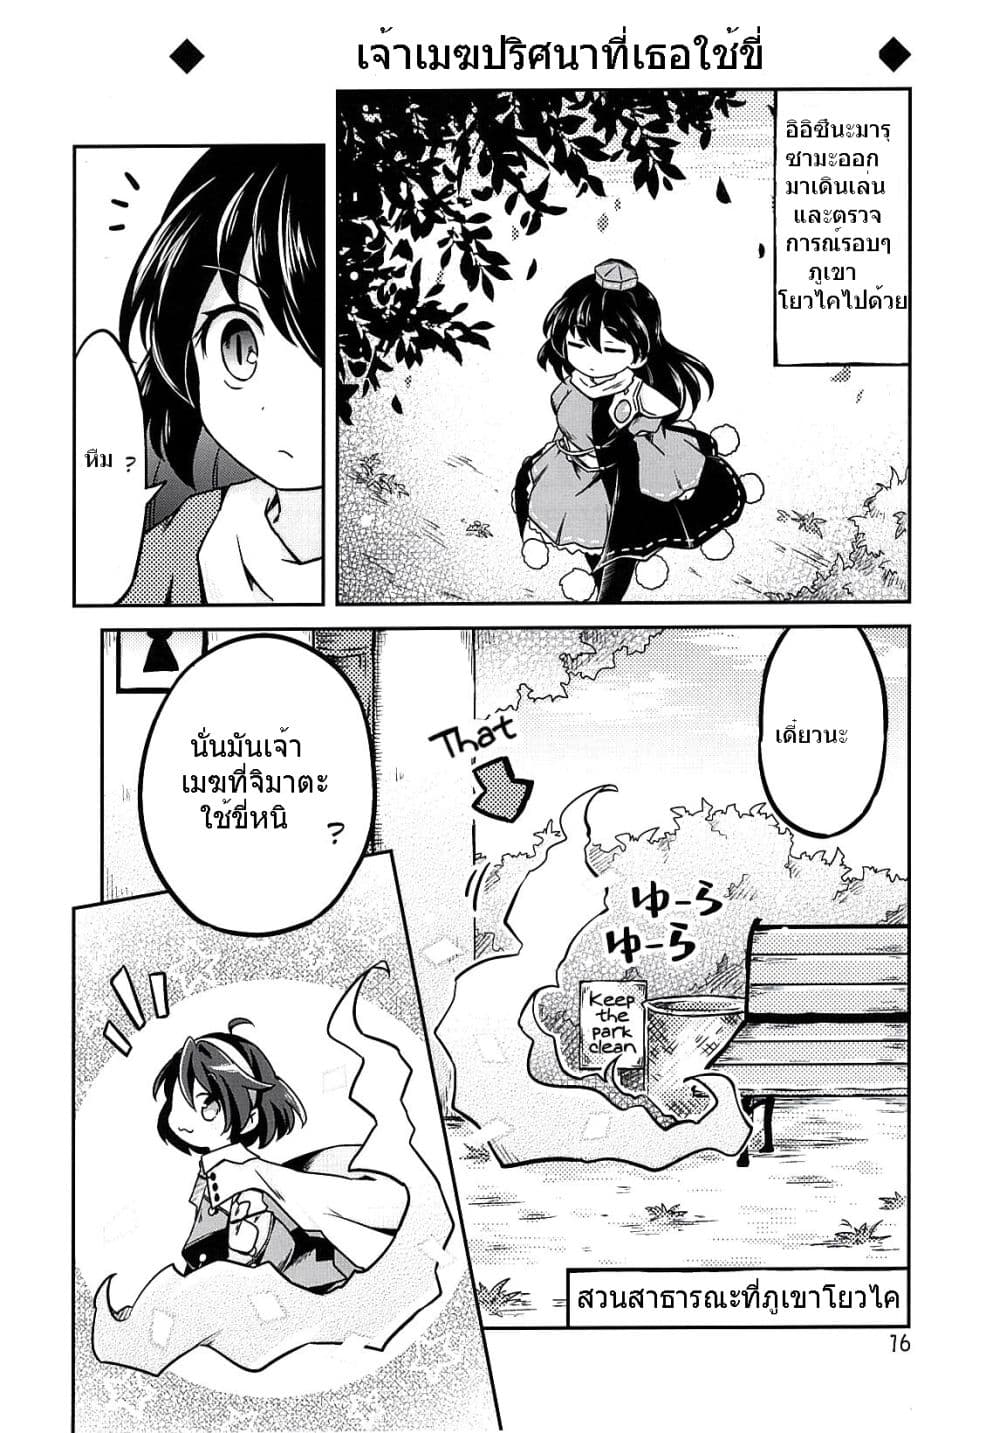 Touhou Project Chima Book By Pote ตอนที่ 2 (16)